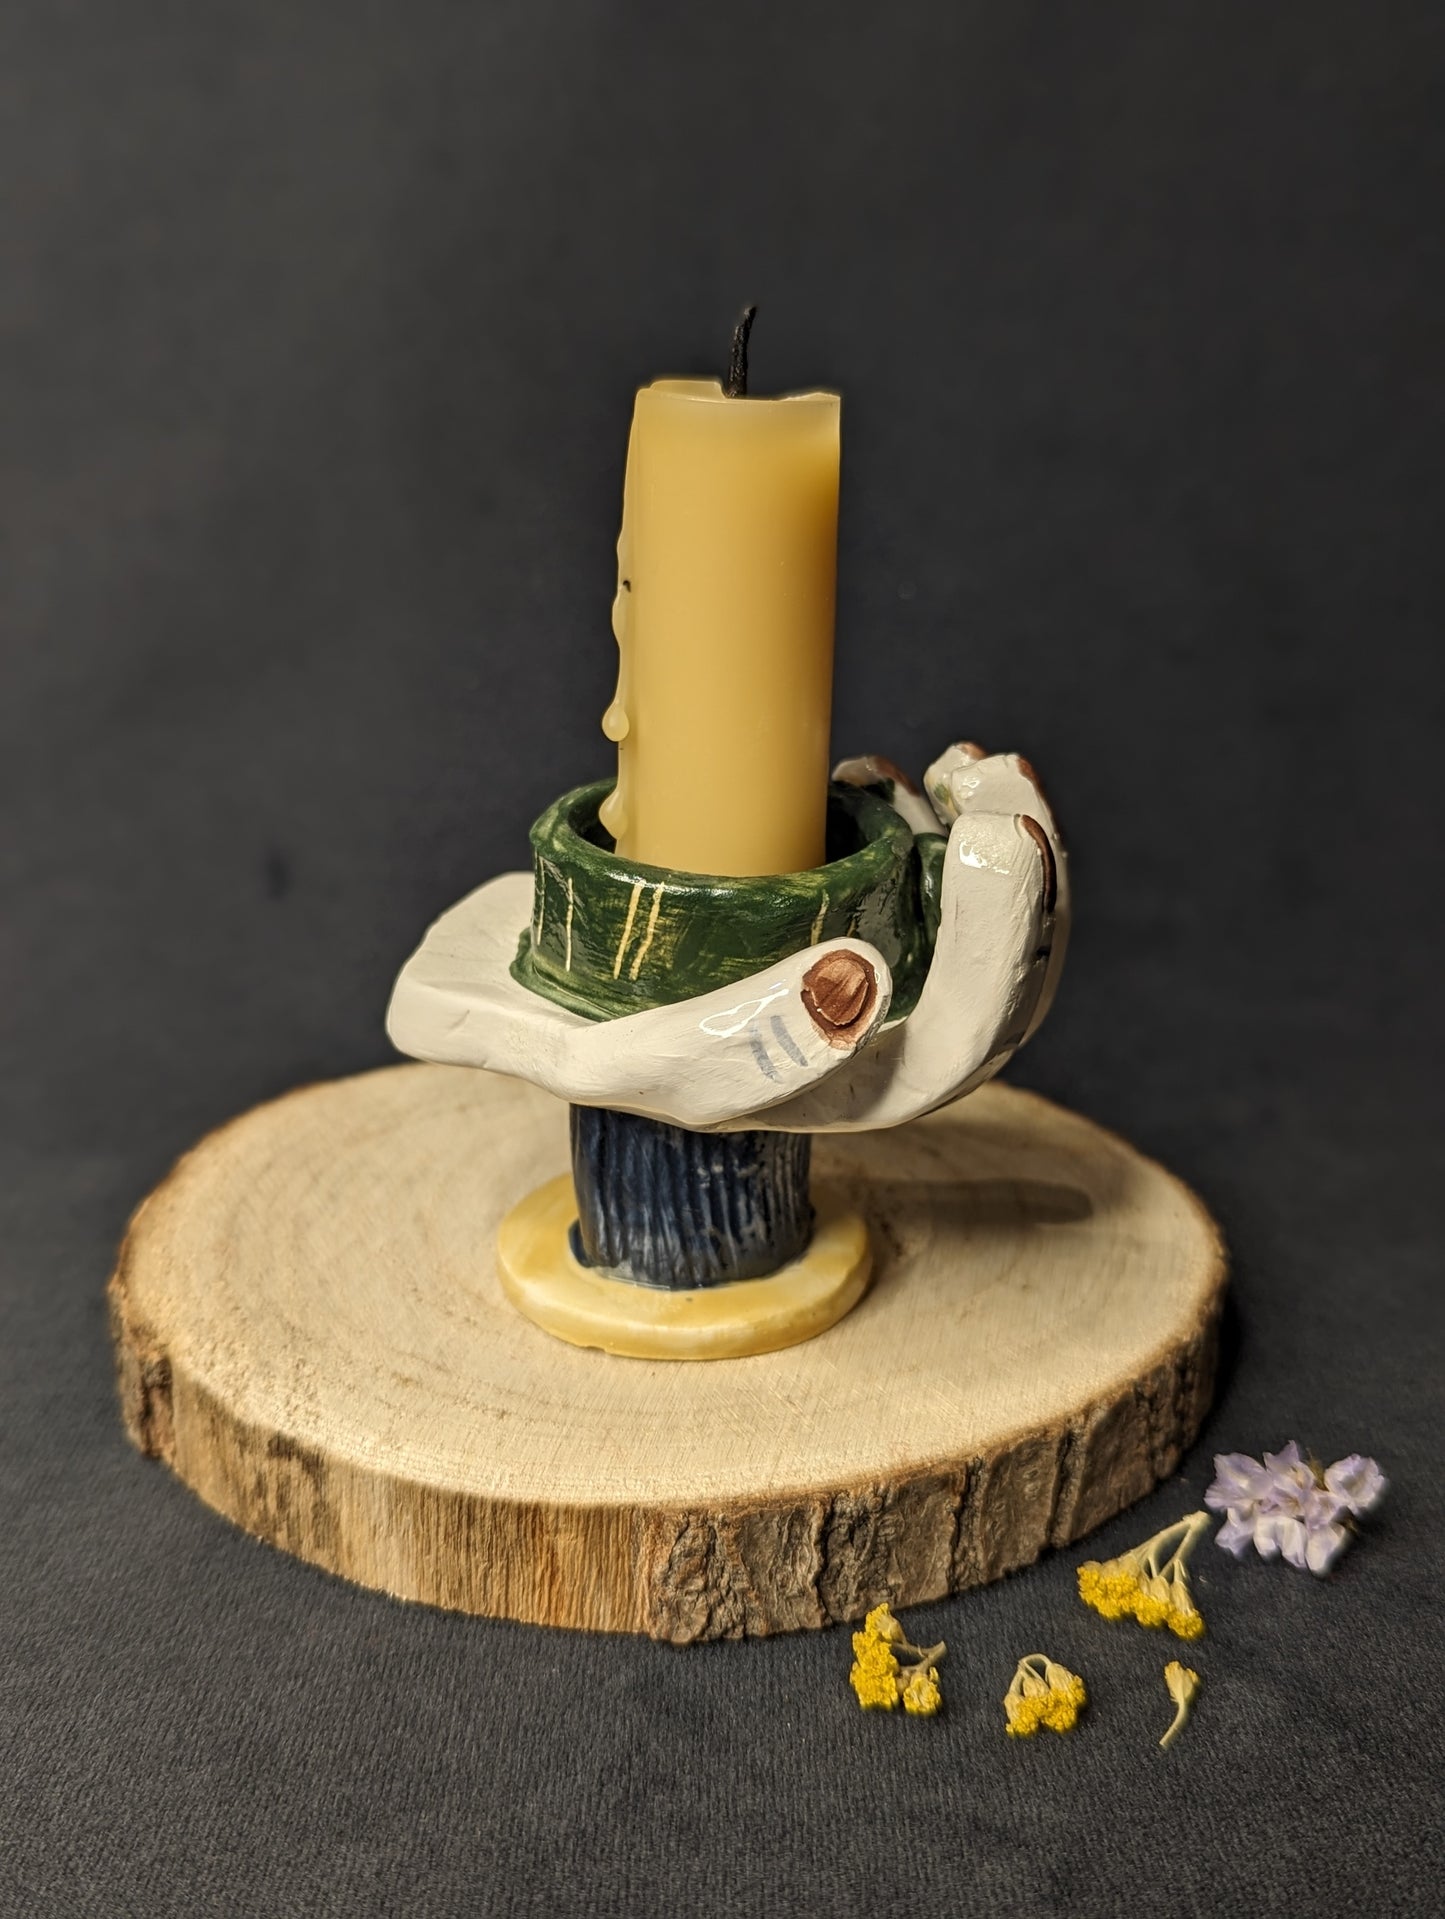 Ceramic Hand Candle Holder by Ciara Veronica Dunne